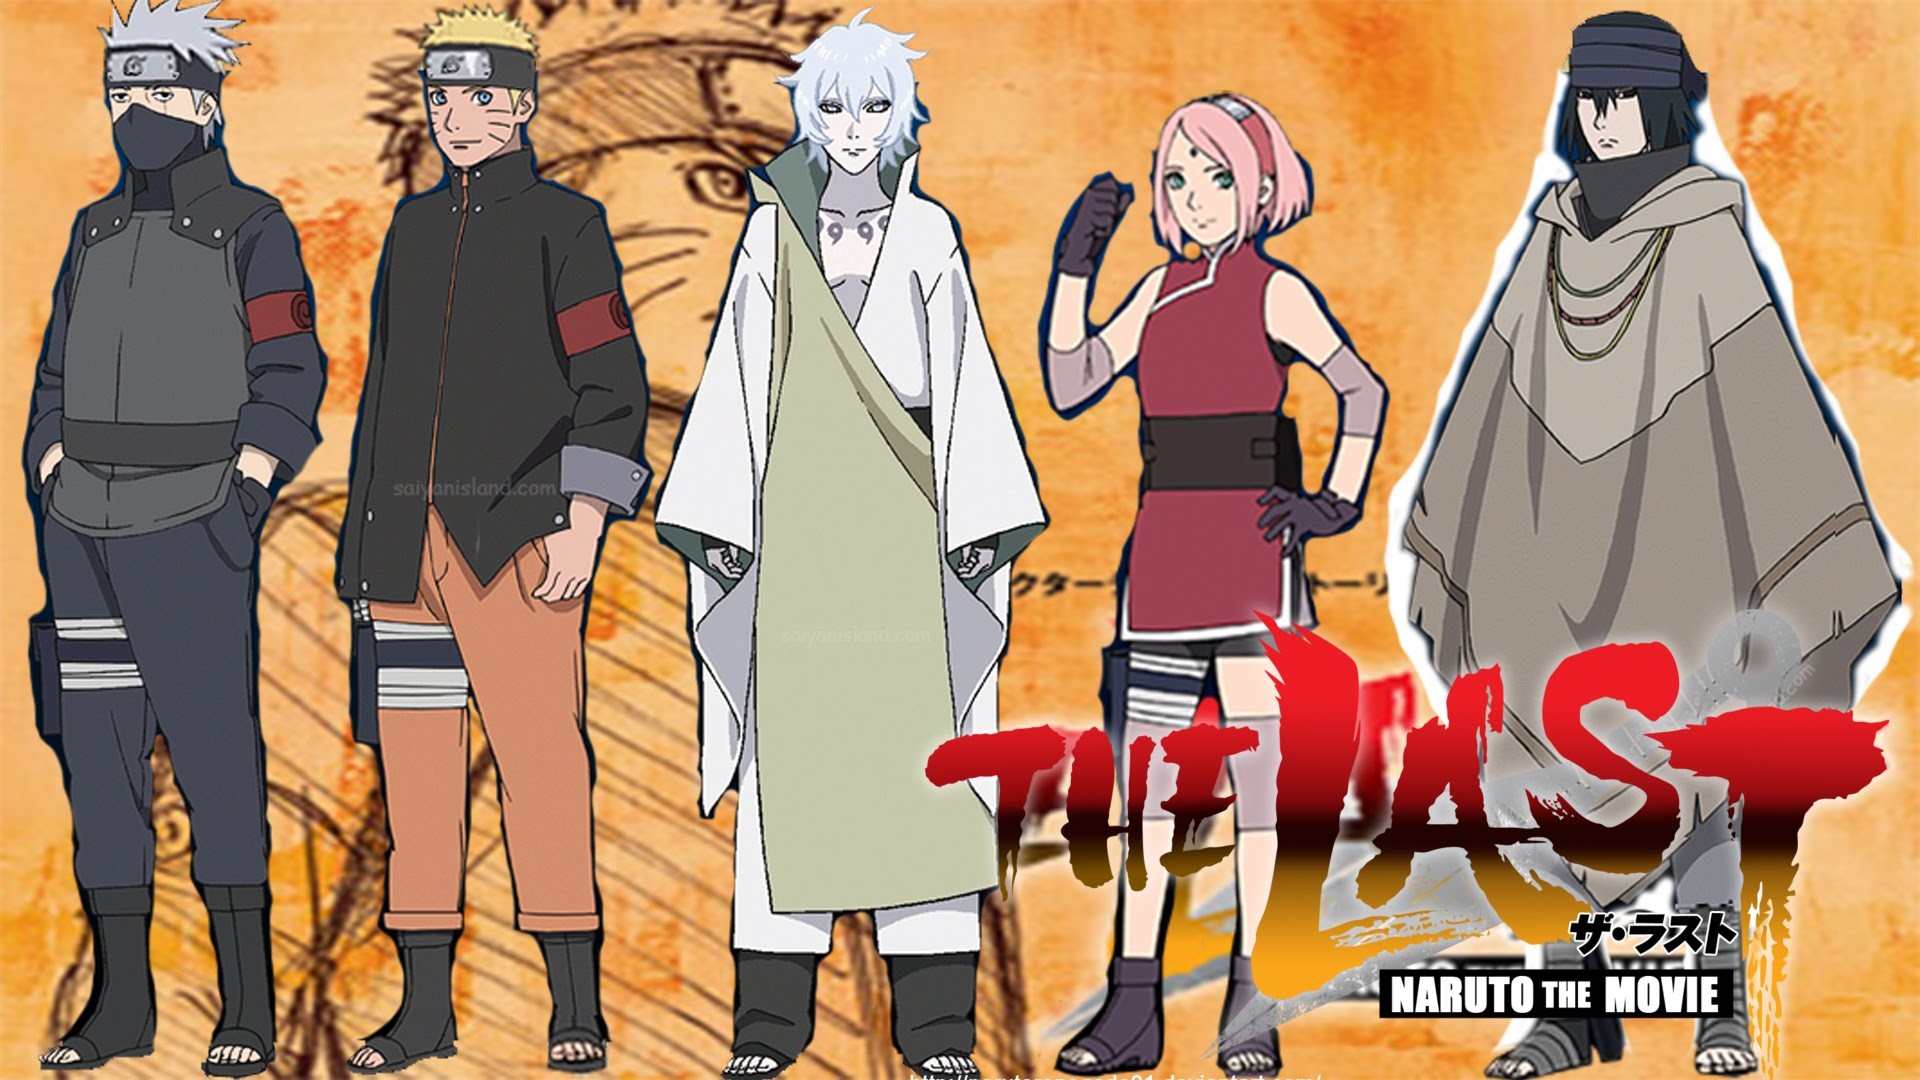 1920x1080 The Last Naruto The Movie: Alle Charaktere (in colour, designs) .